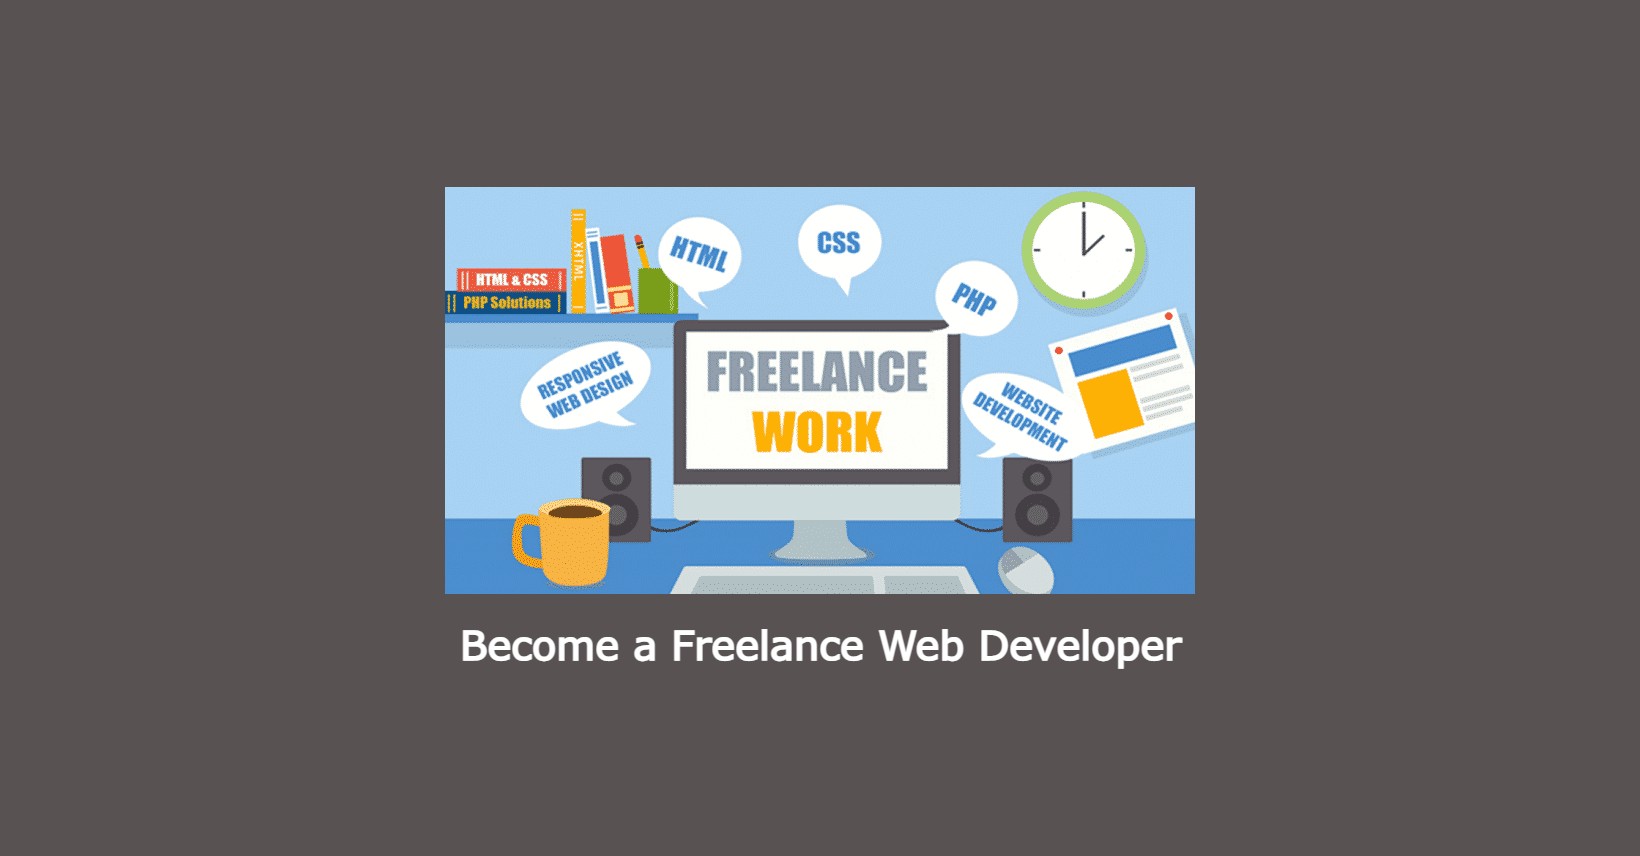 how to become a freelance web developer